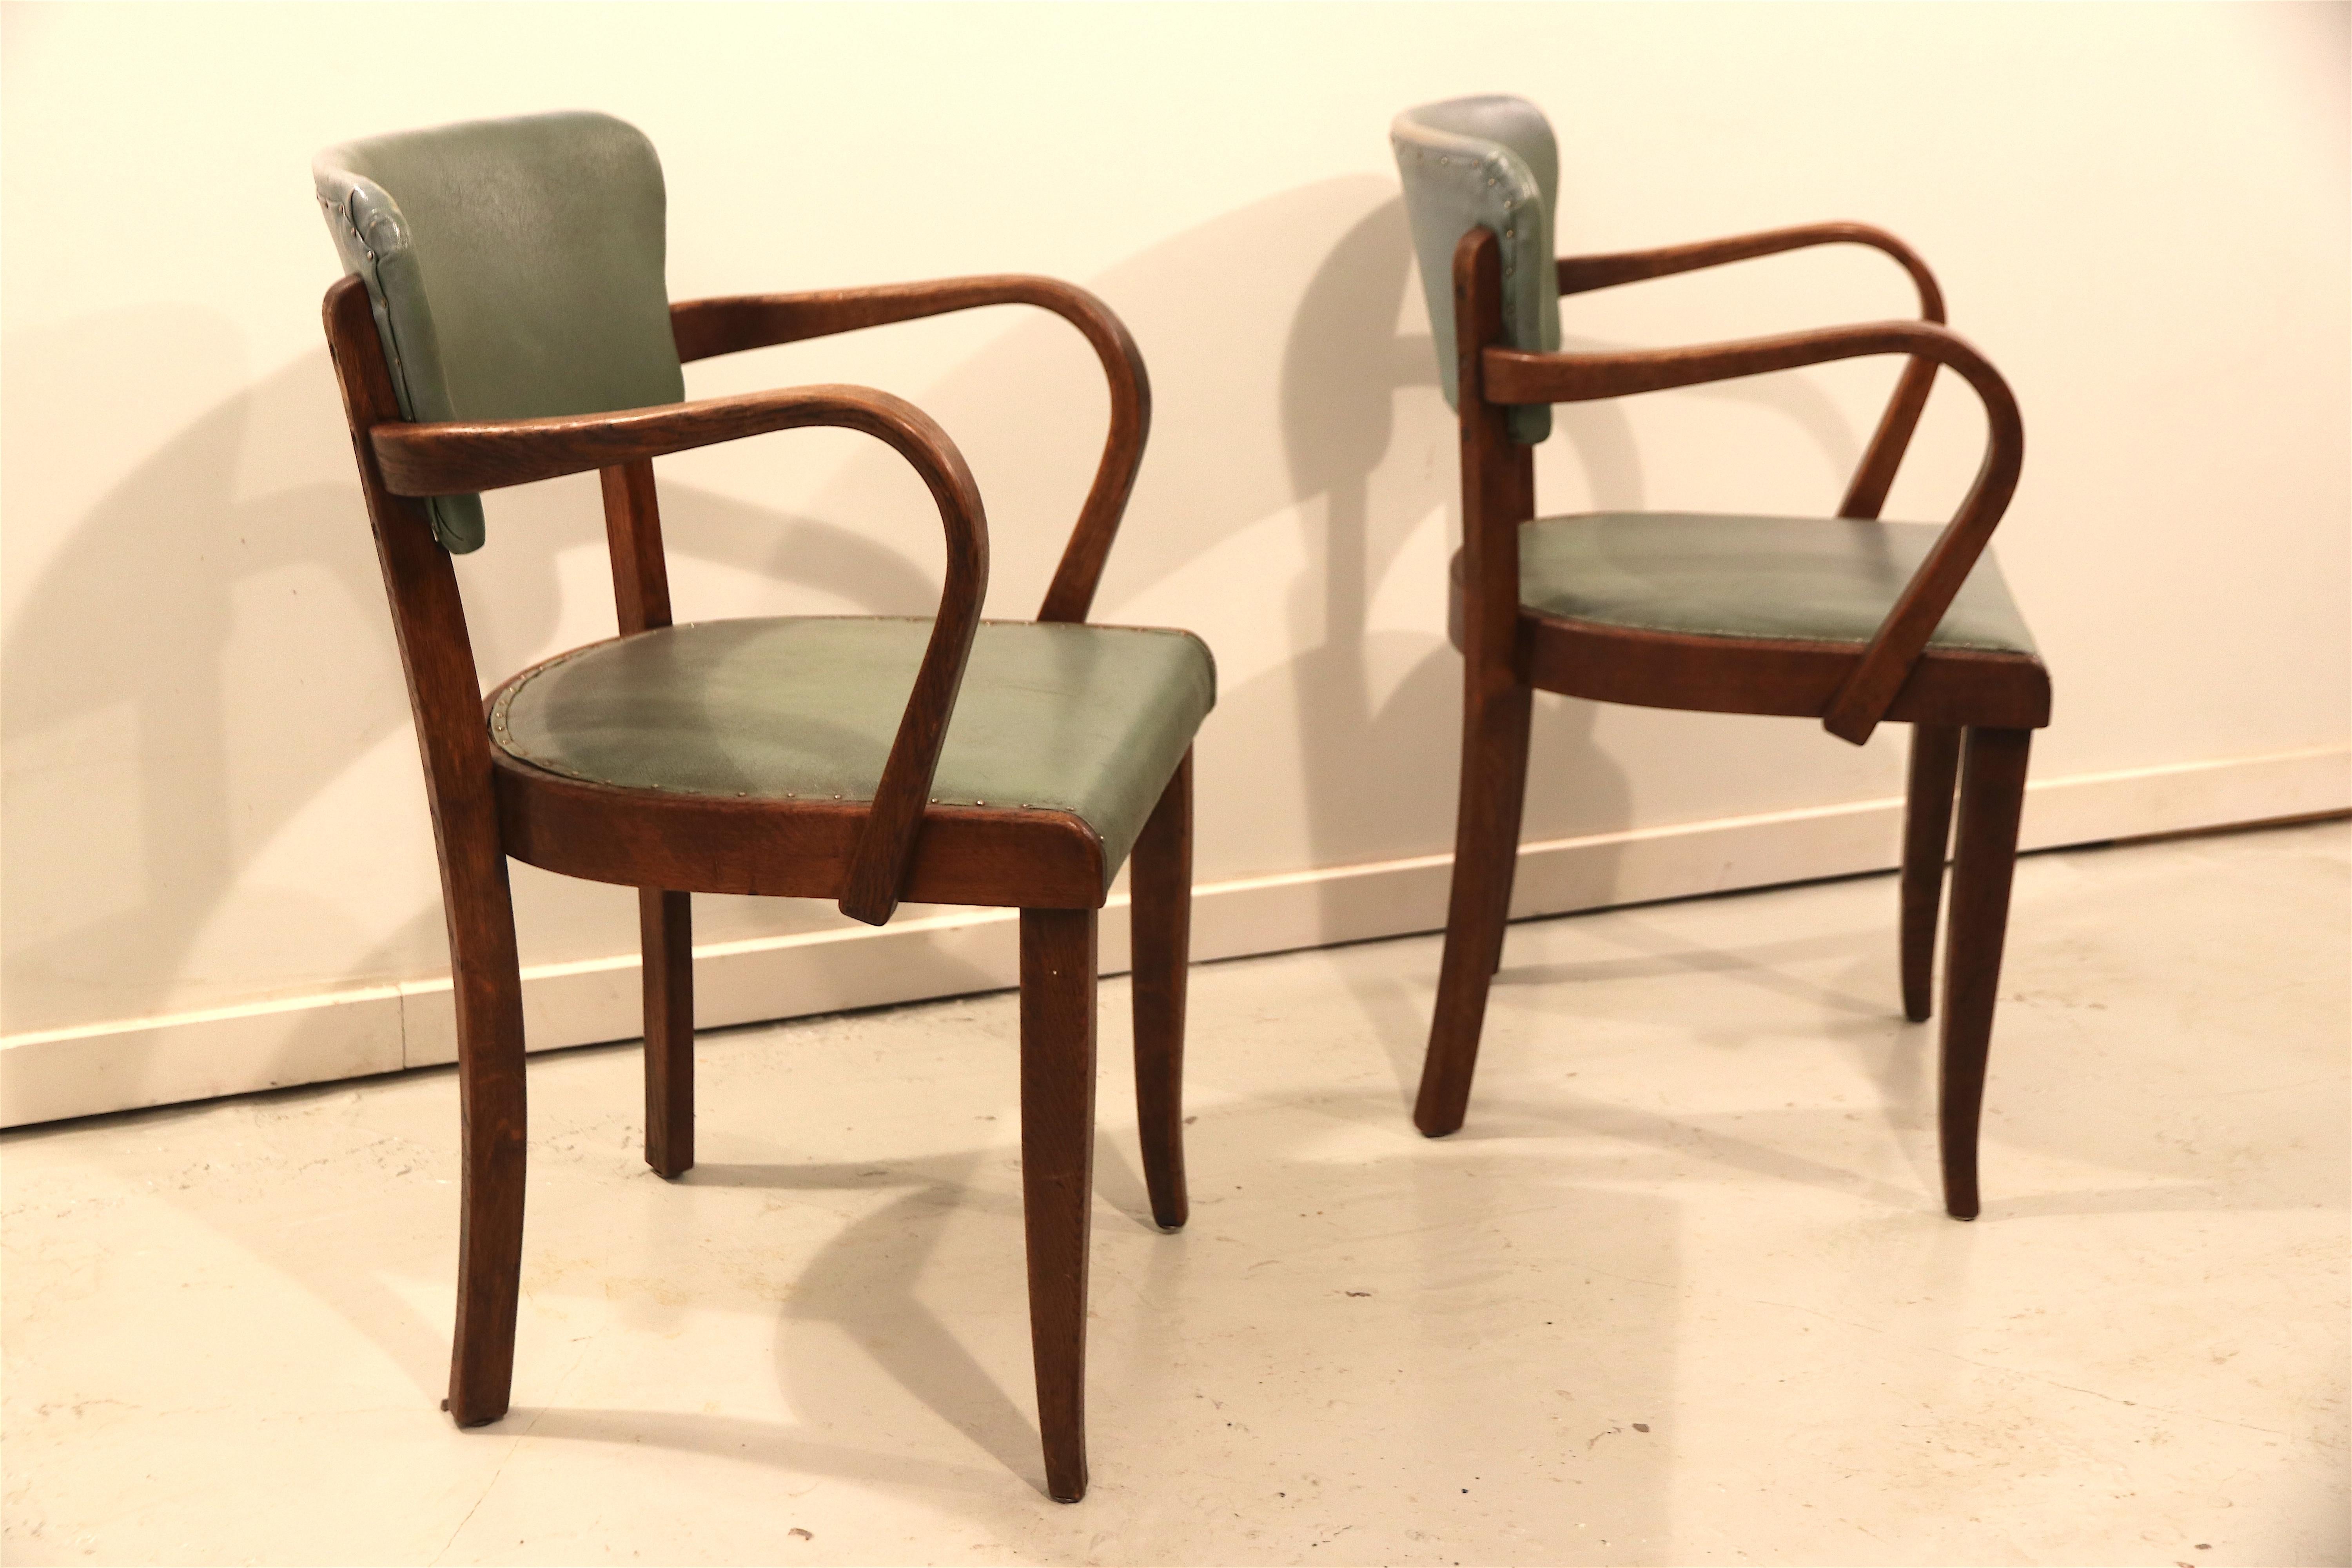 Beautifully shaped art-deco style pair of French oak side chairs, upholstered in their original soft green leatherette; ideal for use in the bedroom or bathroom or as a set of extra dining chairs. The structure has been completely restored and